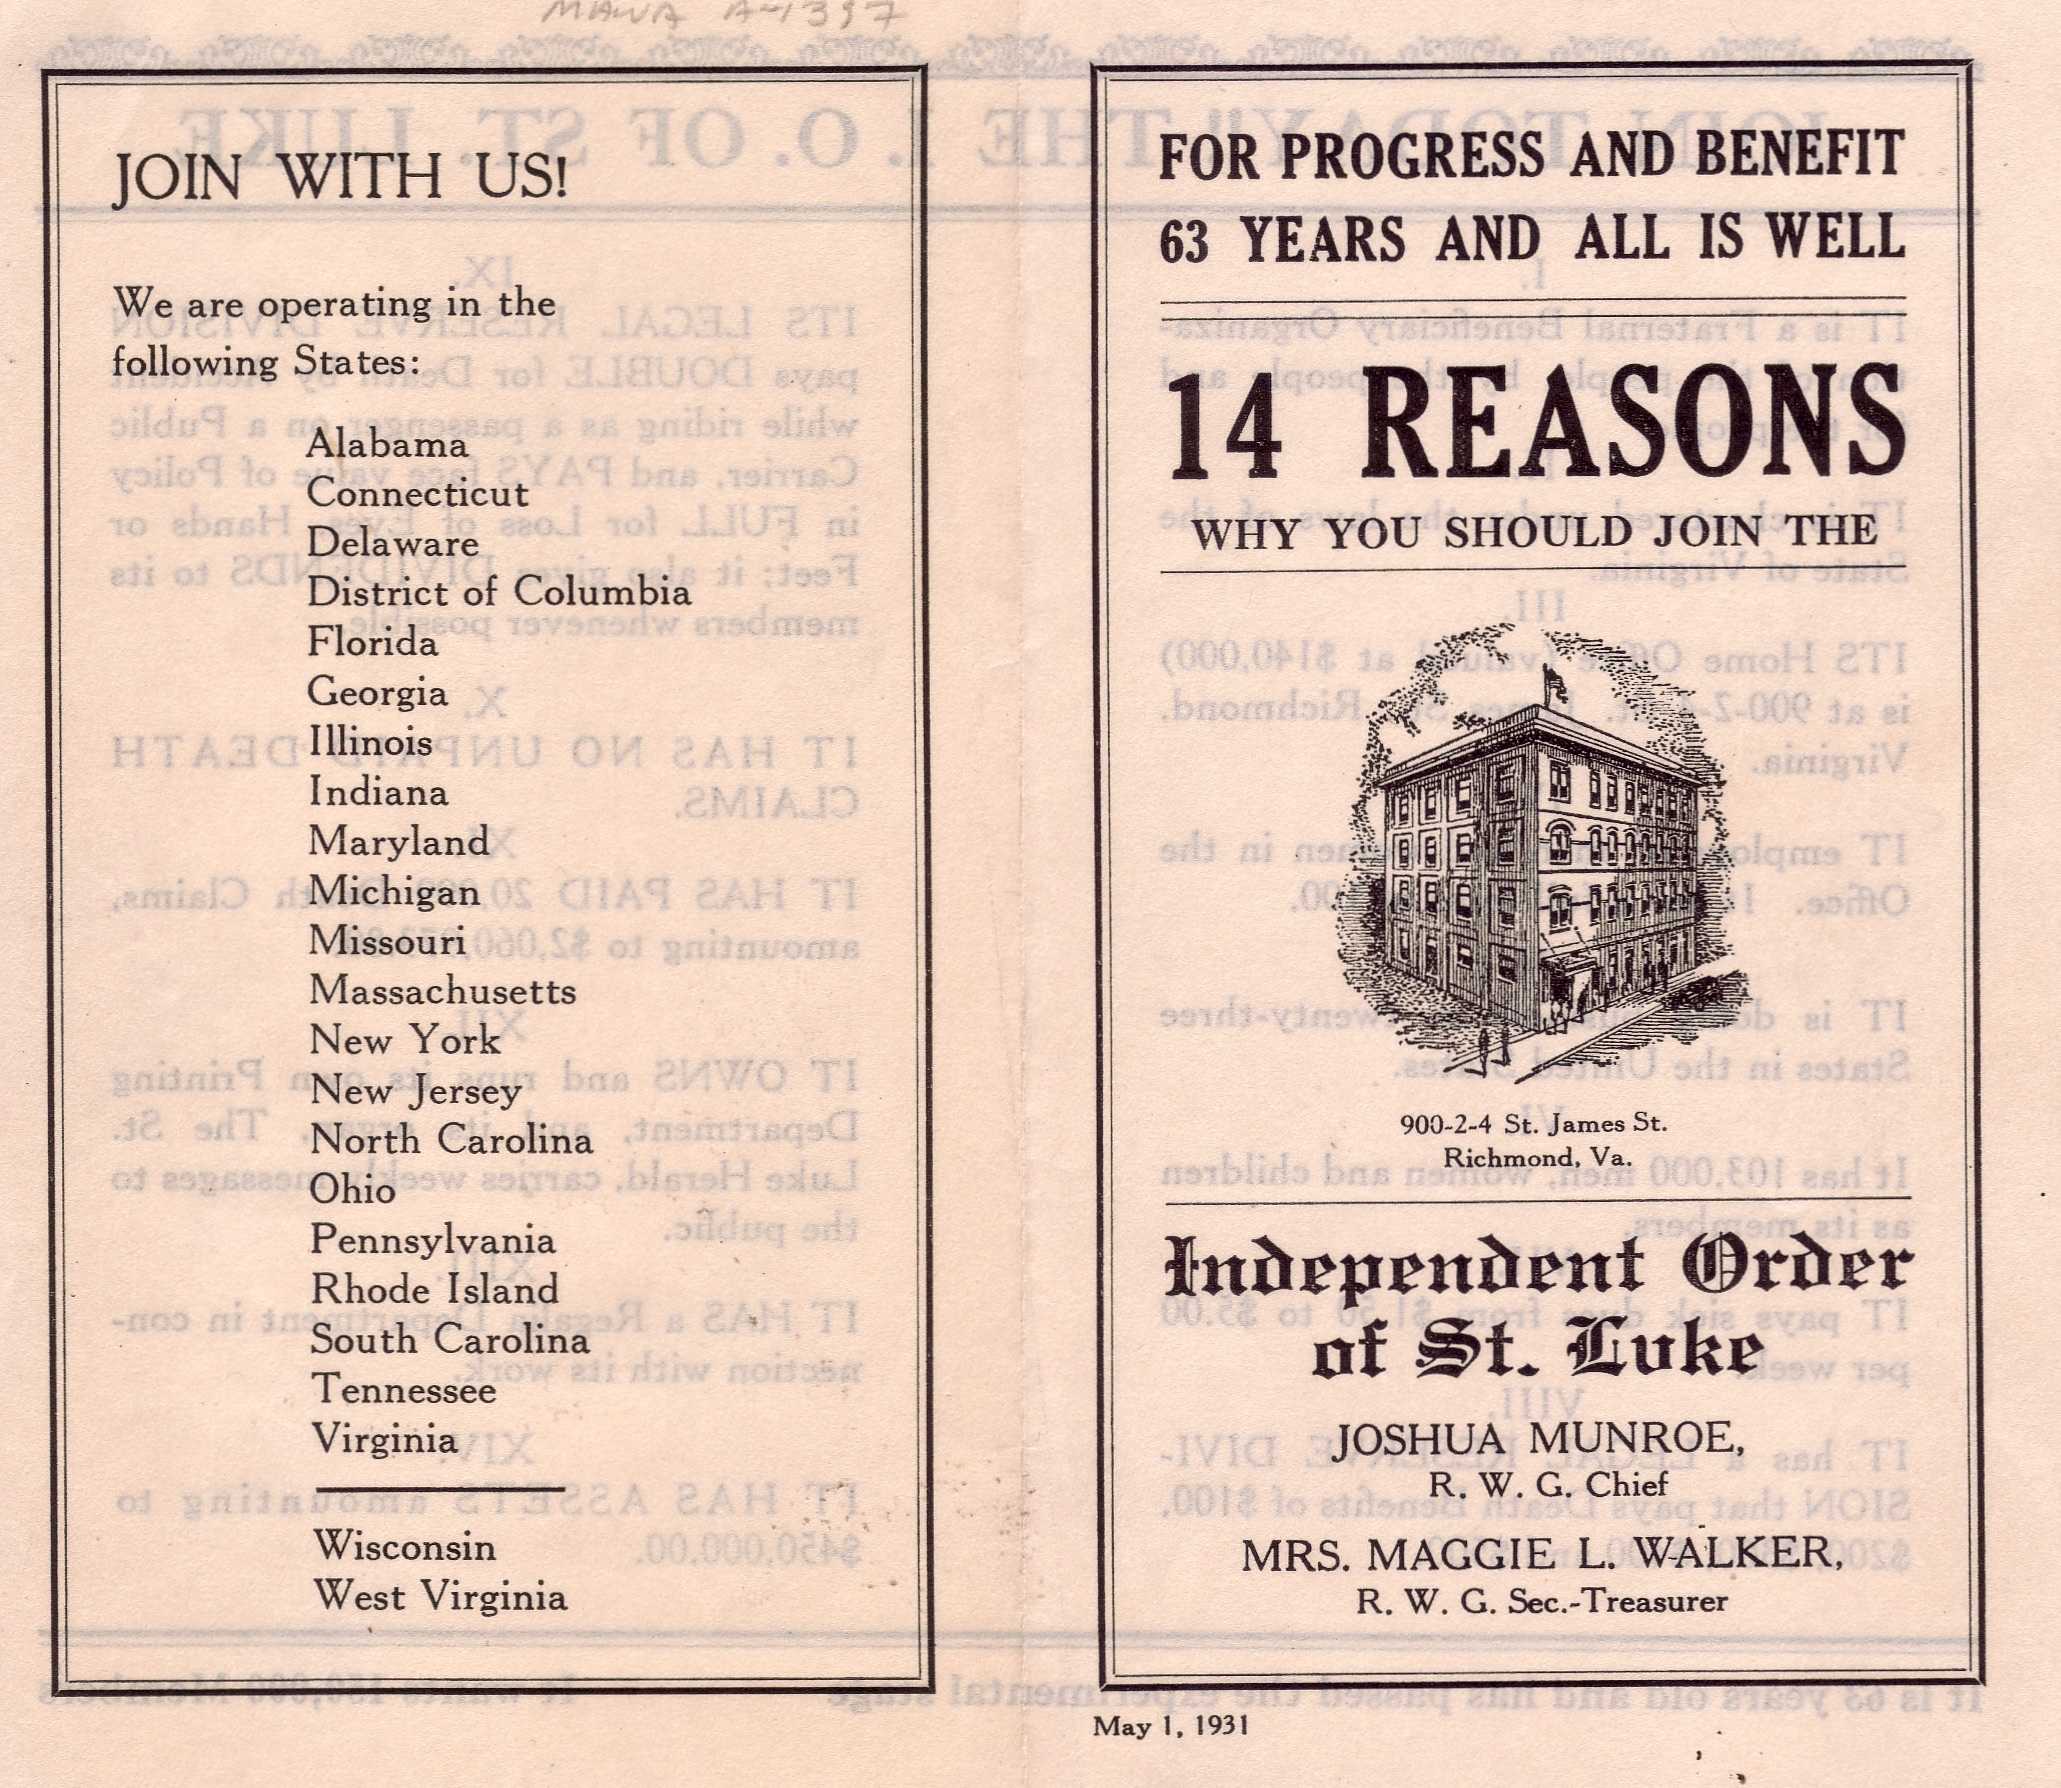 Recruitment brochure from Independent Order of St Luke.